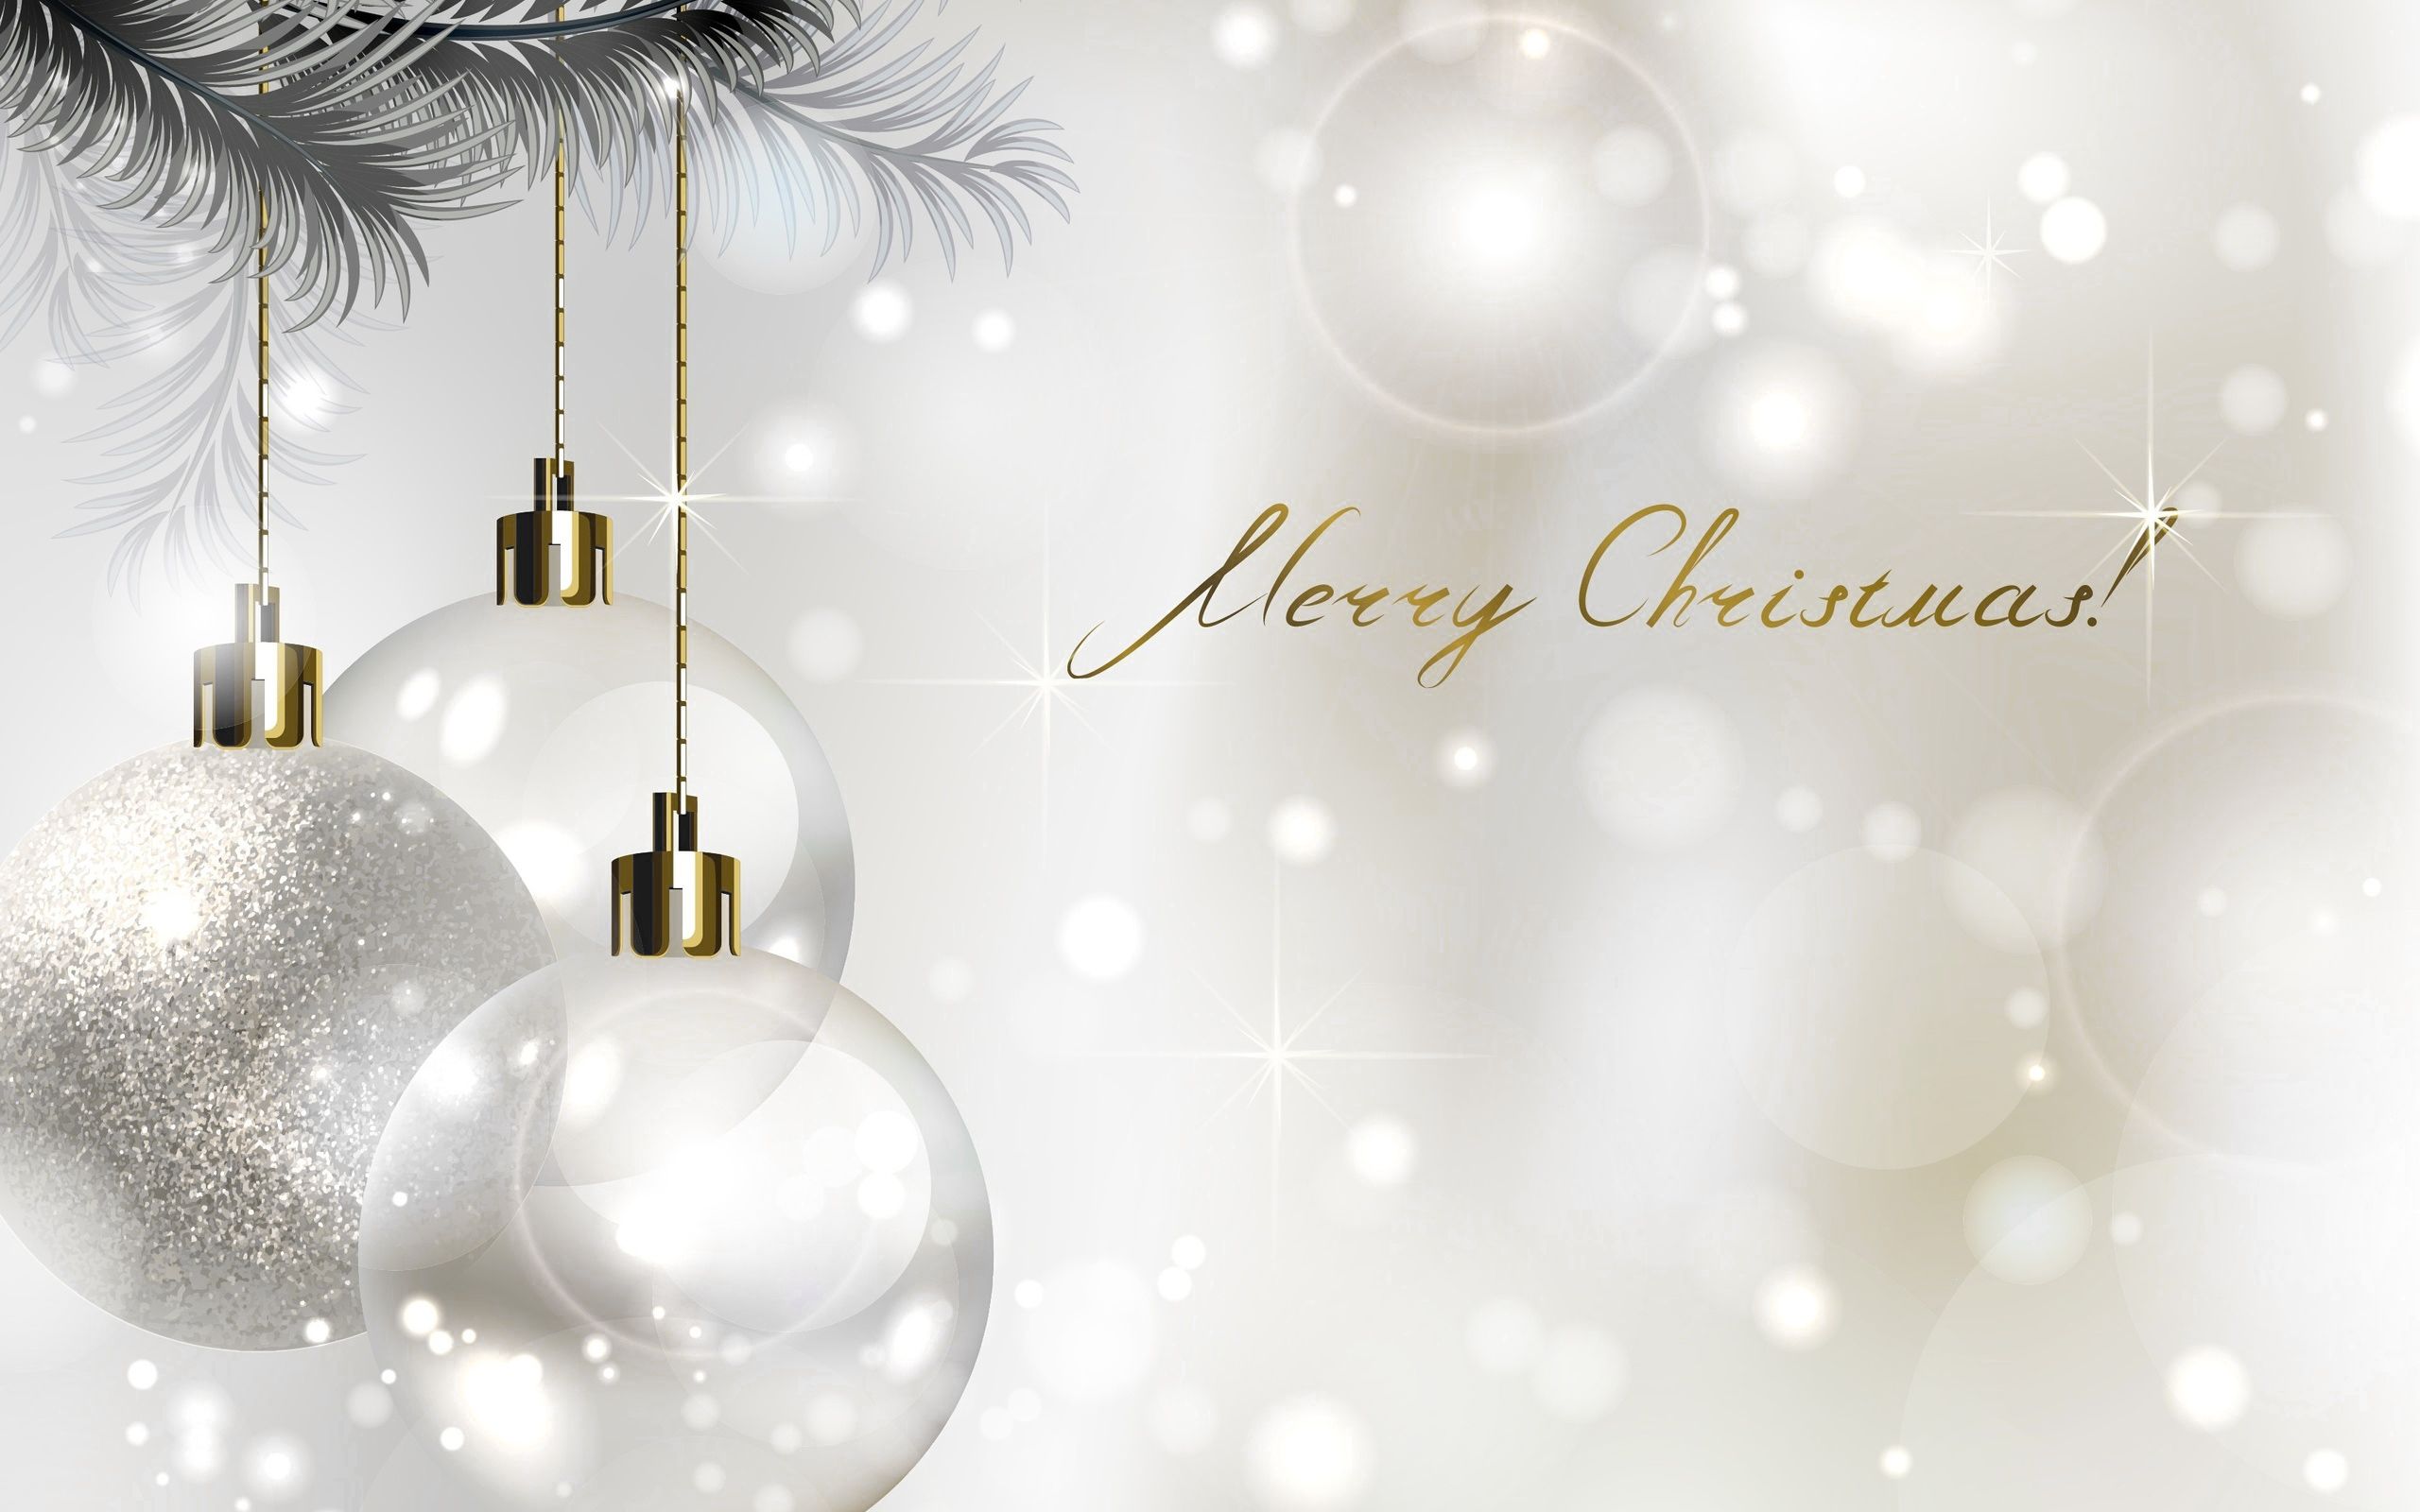 Merry Christmas Silver Background. Merry christmas wallpaper, Christmas desktop wallpaper, Christmas wallpaper